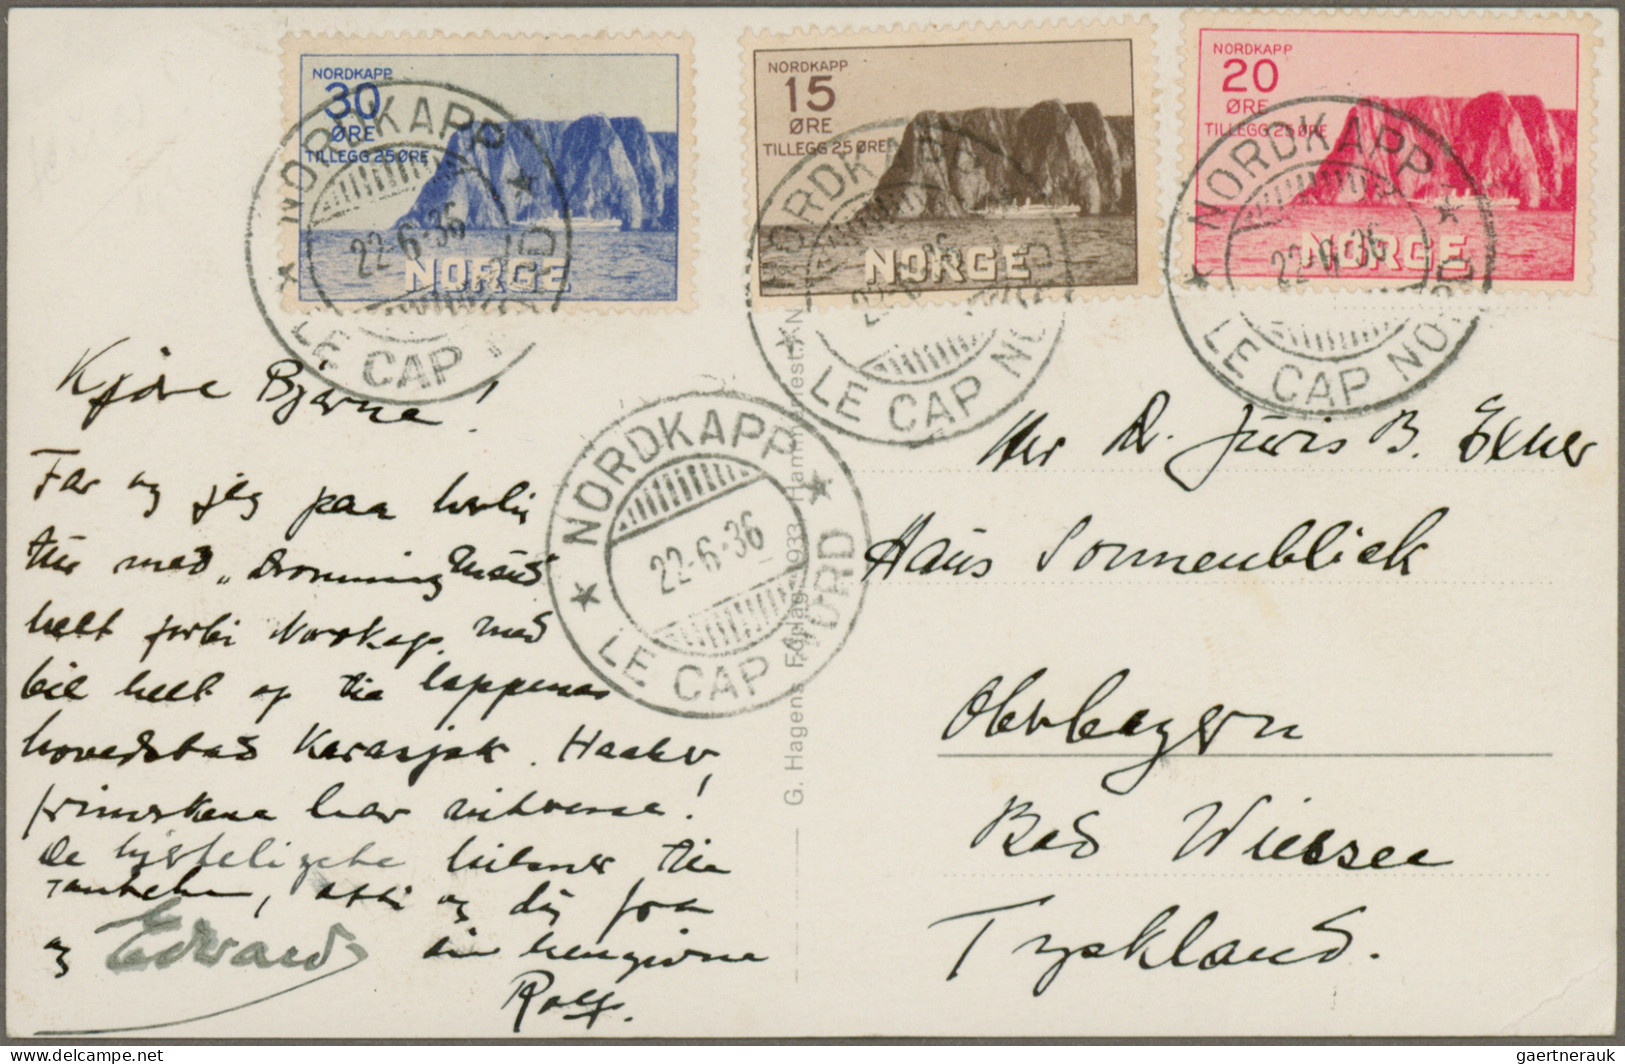 Norway: 1930, NORDKAPP 1st Issue, Complete Set Of 3 Stamps, Tied By Bilingual Cd - Covers & Documents